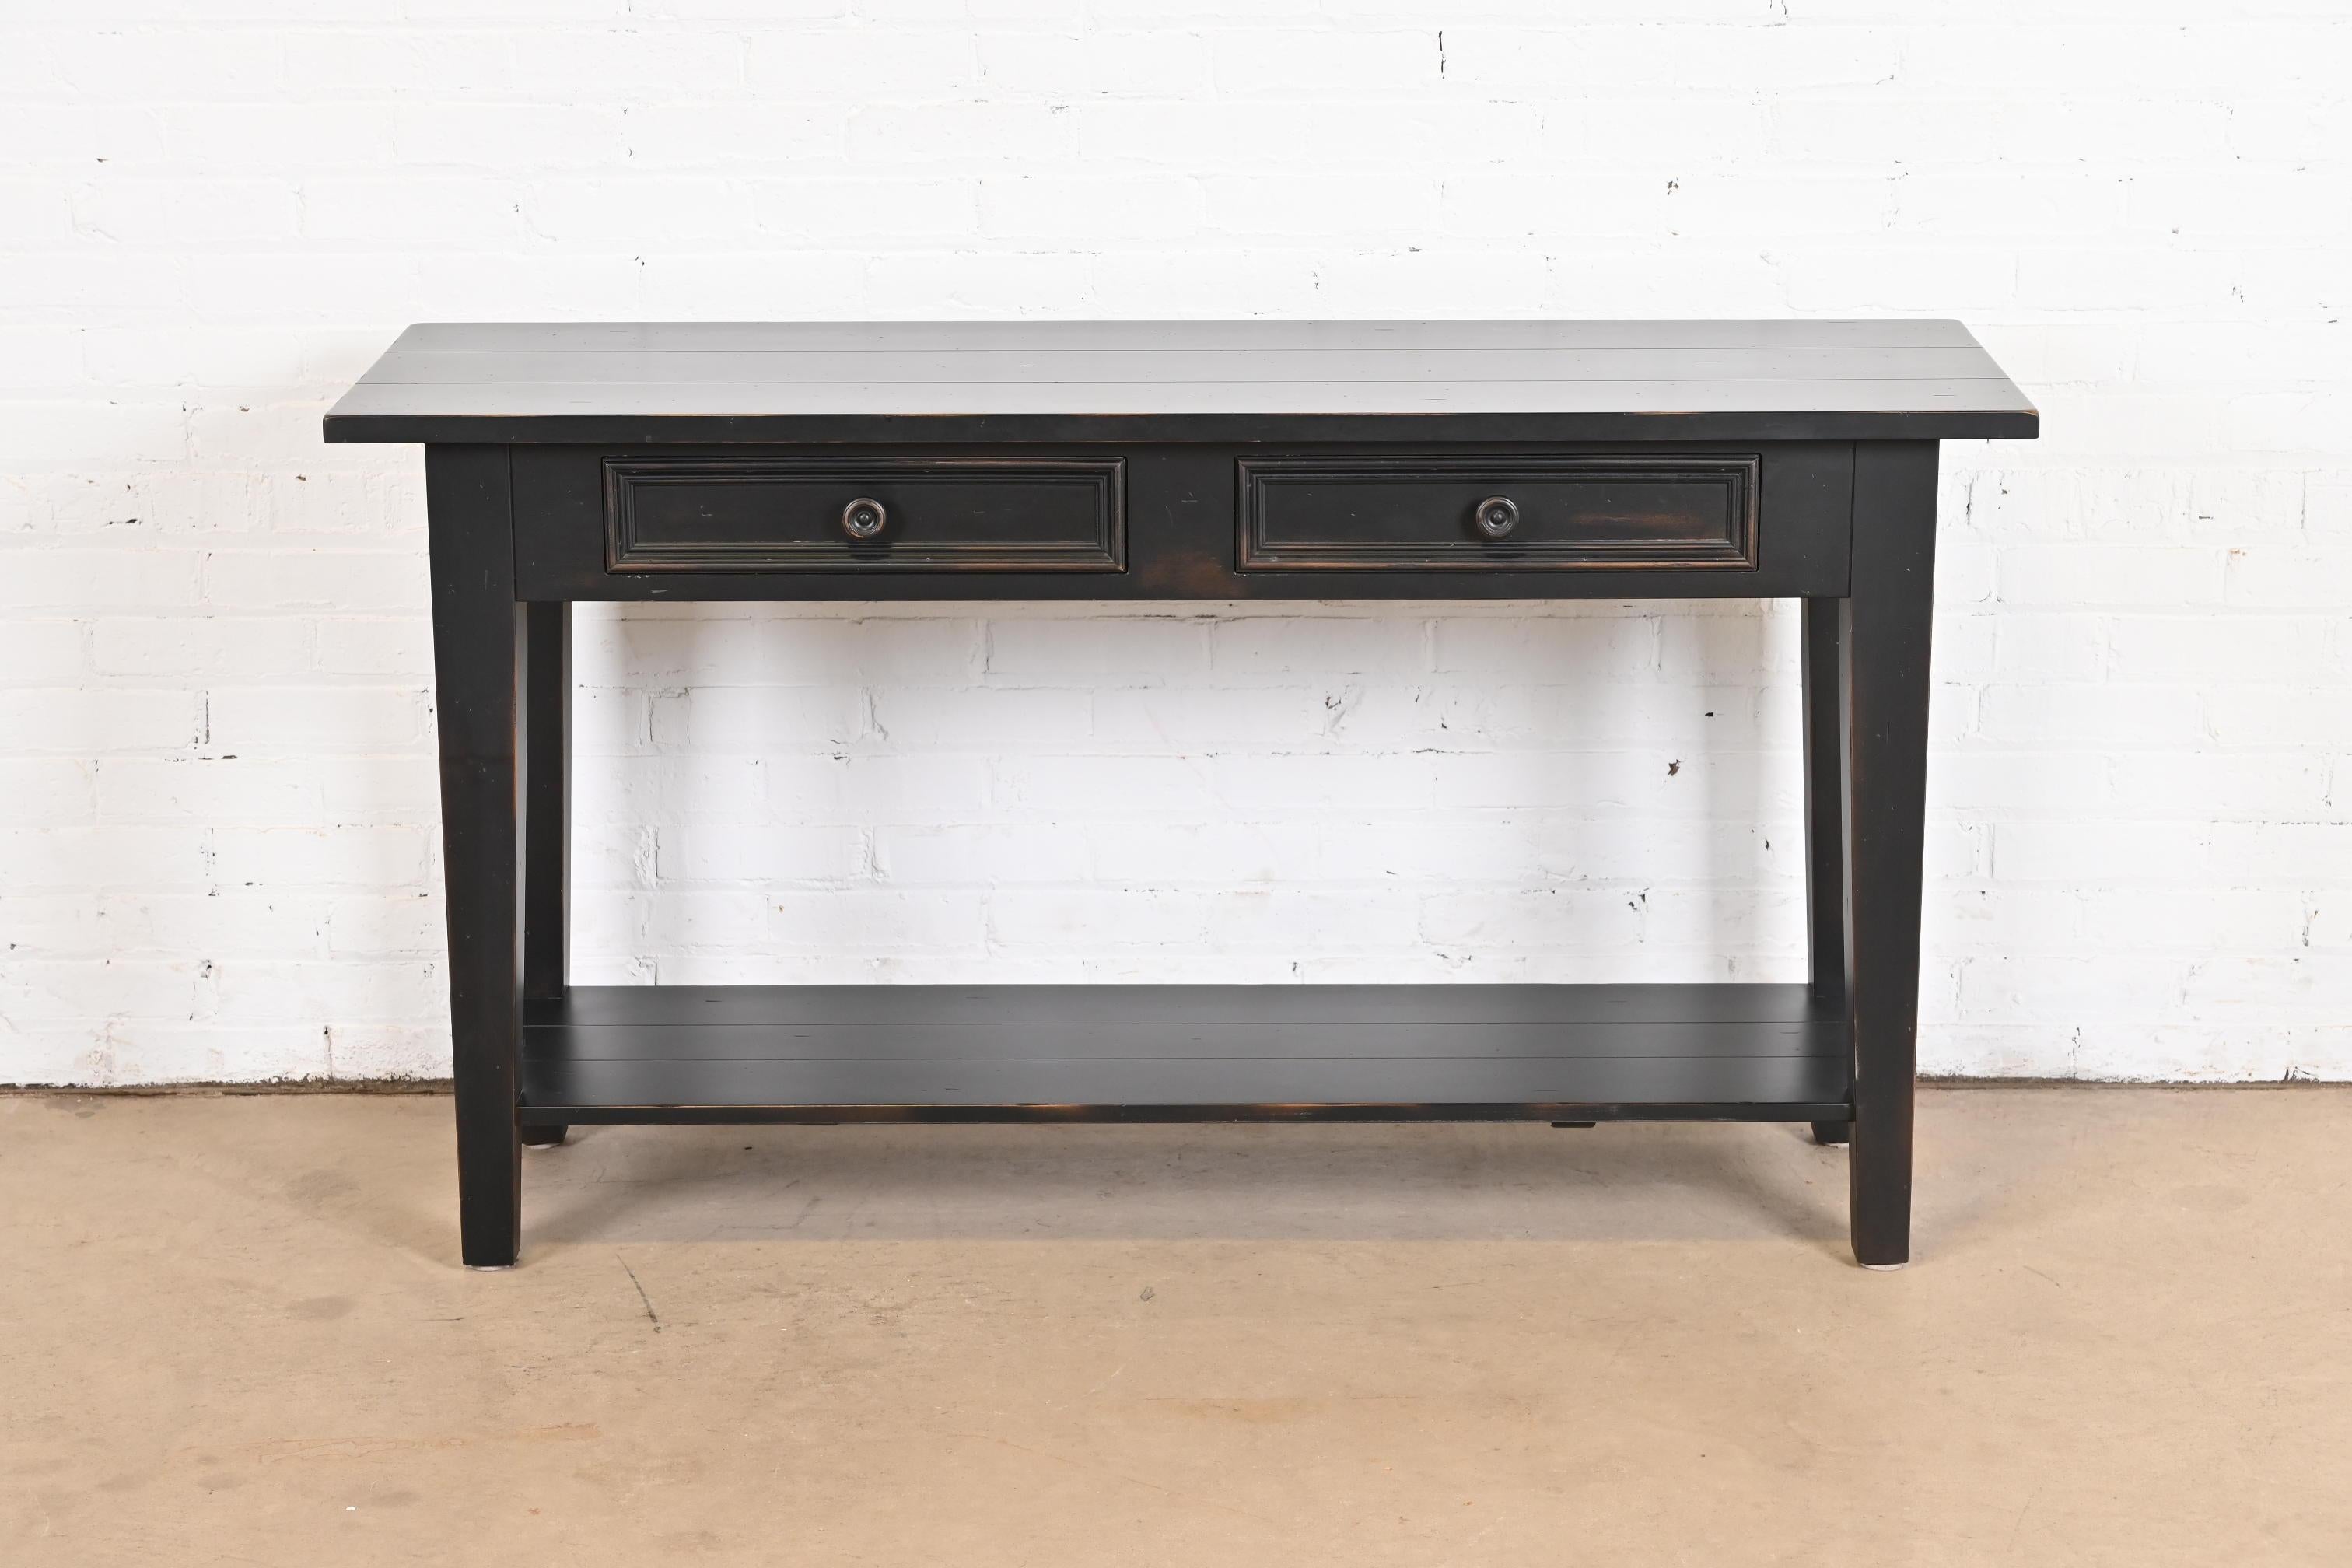 A gorgeous Early American or Shaker style ebonized maple sideboard, buffet server, or console table

USA, Late 20th Century

Measures: 55.75